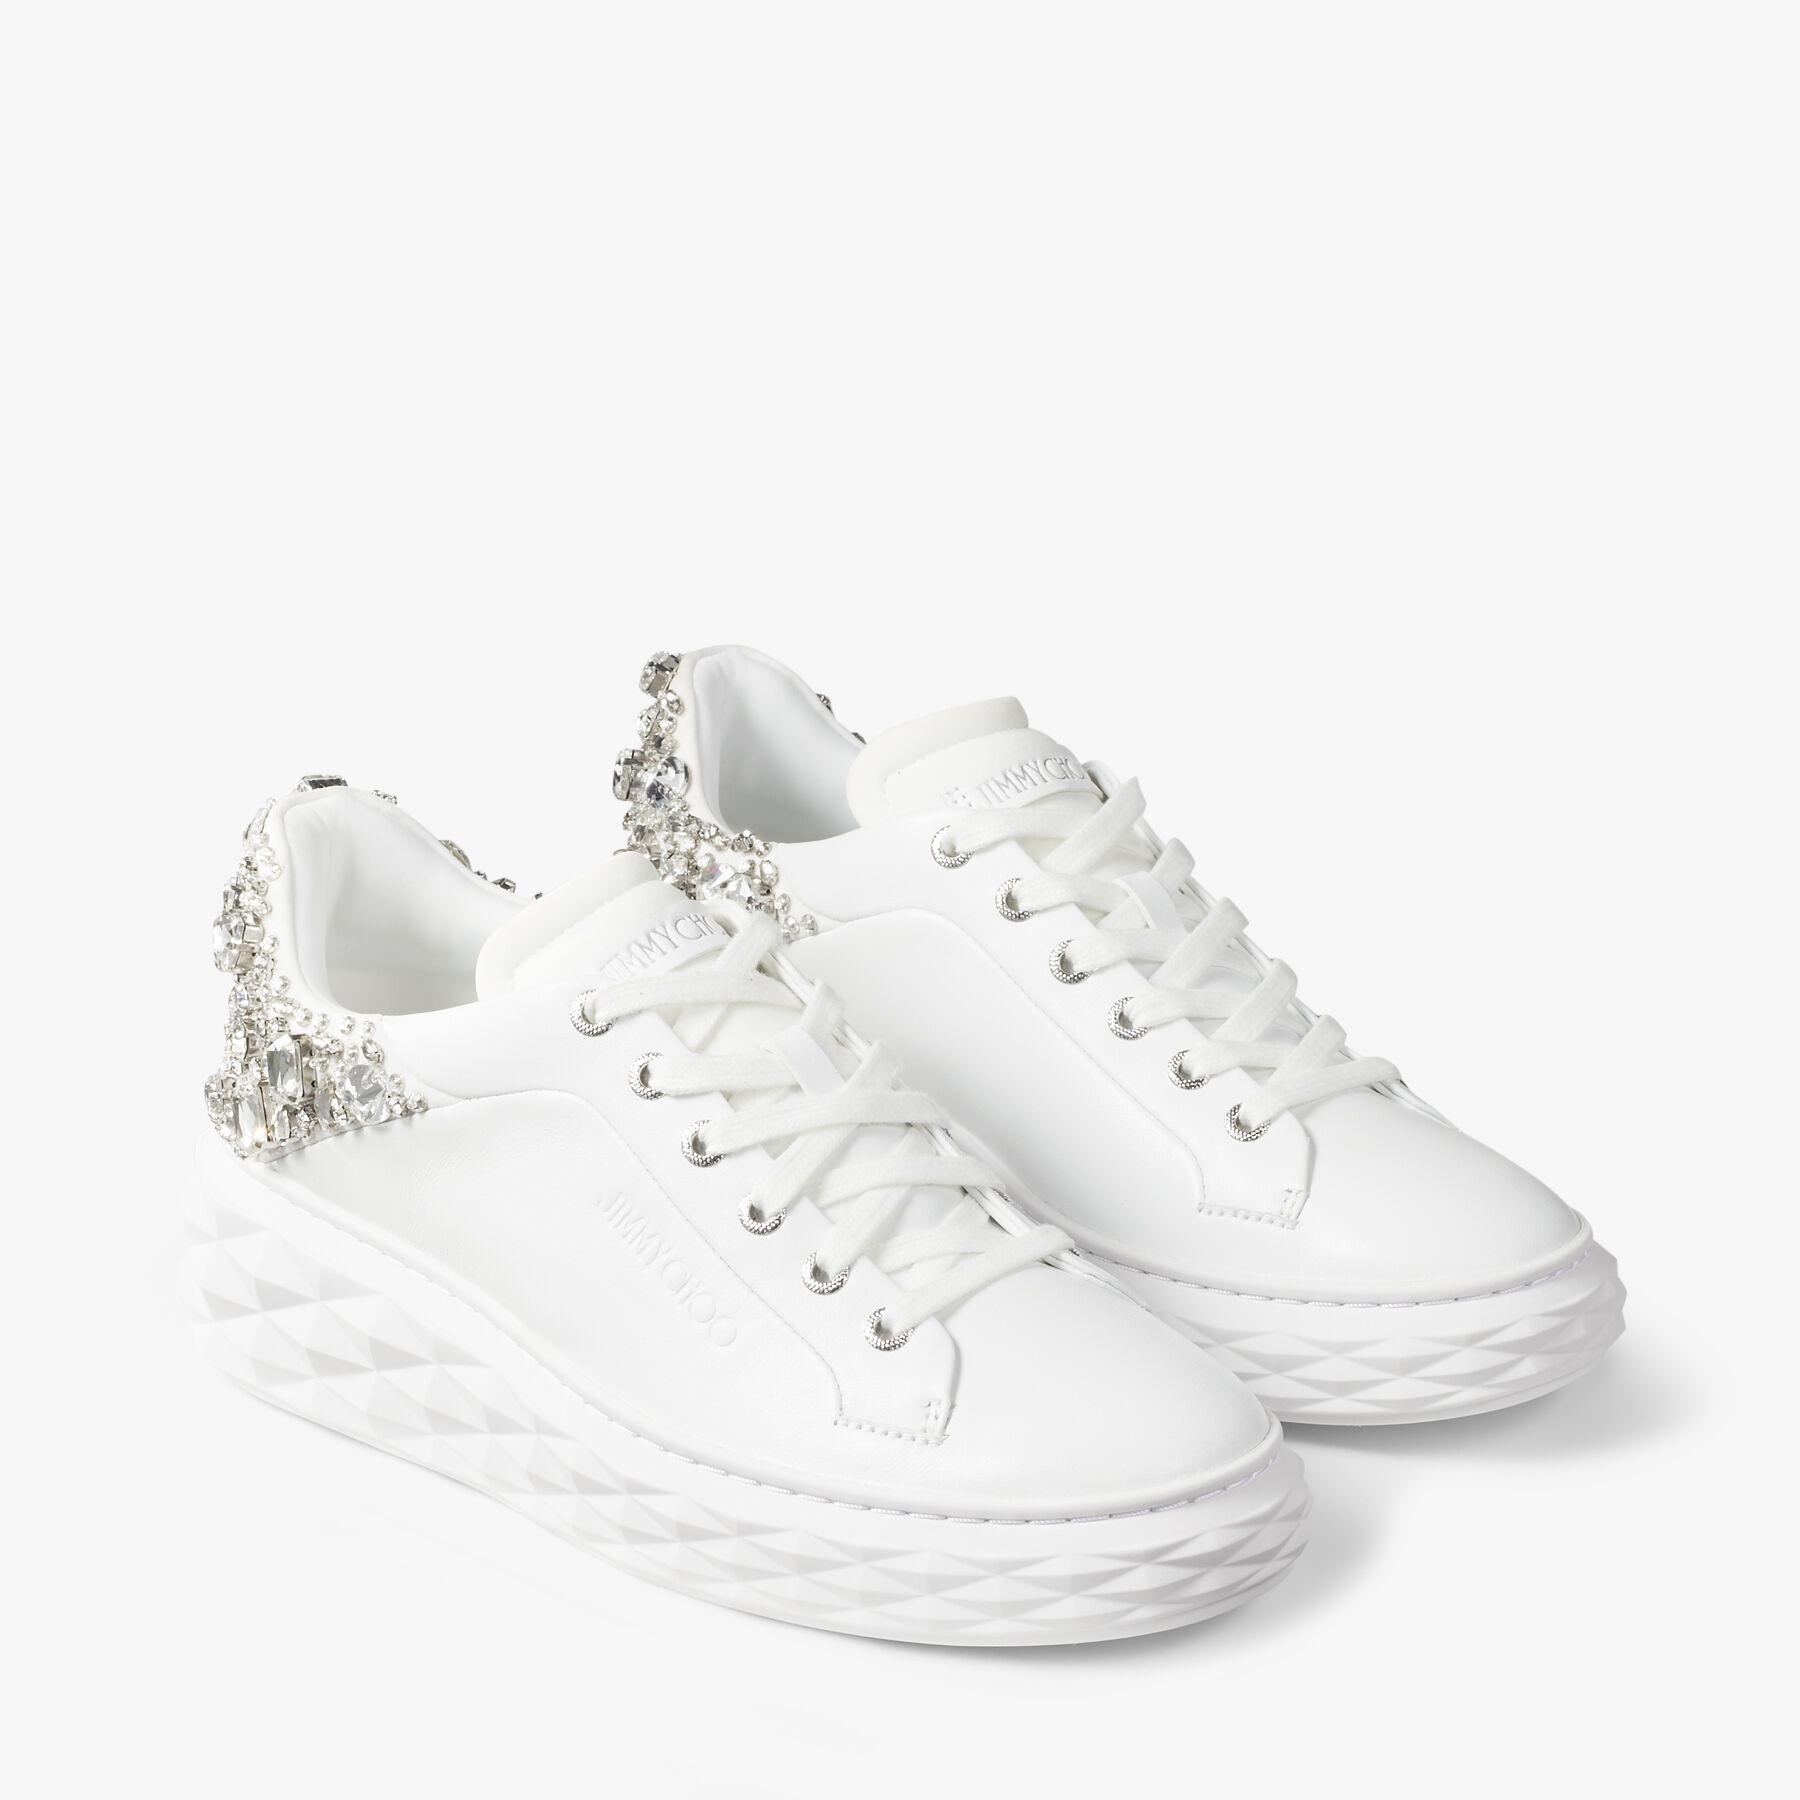 Diamond Maxi/f Ii
White and Silver Nappa Leather Trainers with Crystals - 3